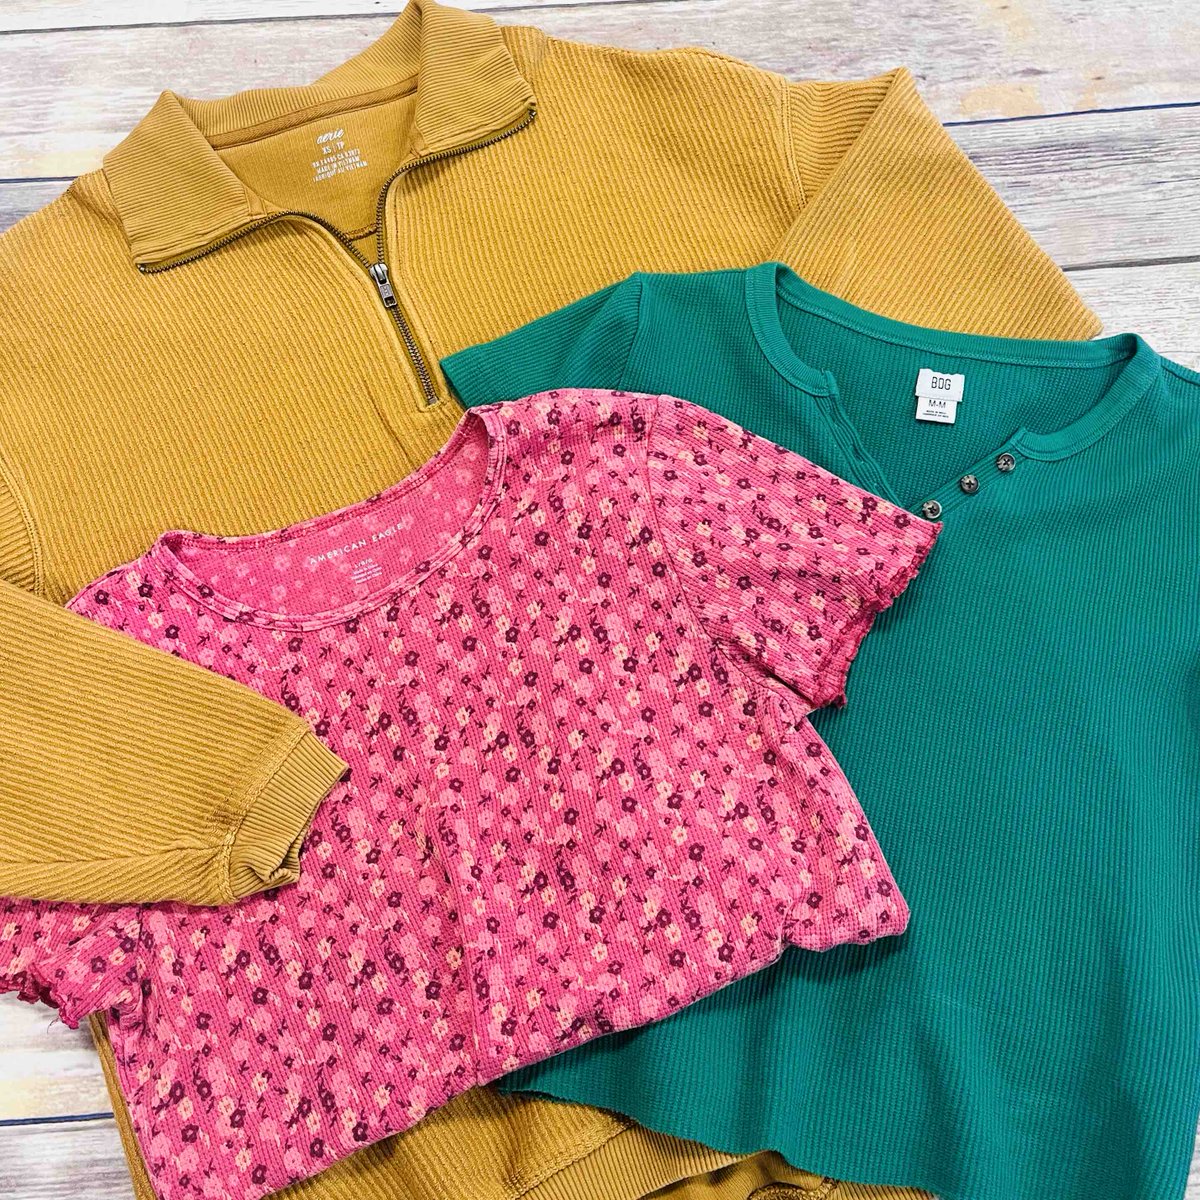 Get ready for summer with bold colors and florals for less ✨
———
#gentlyused #platoscloset #thriftedootd #thriftedstyle #brandsforless #prelovedfashion #spring